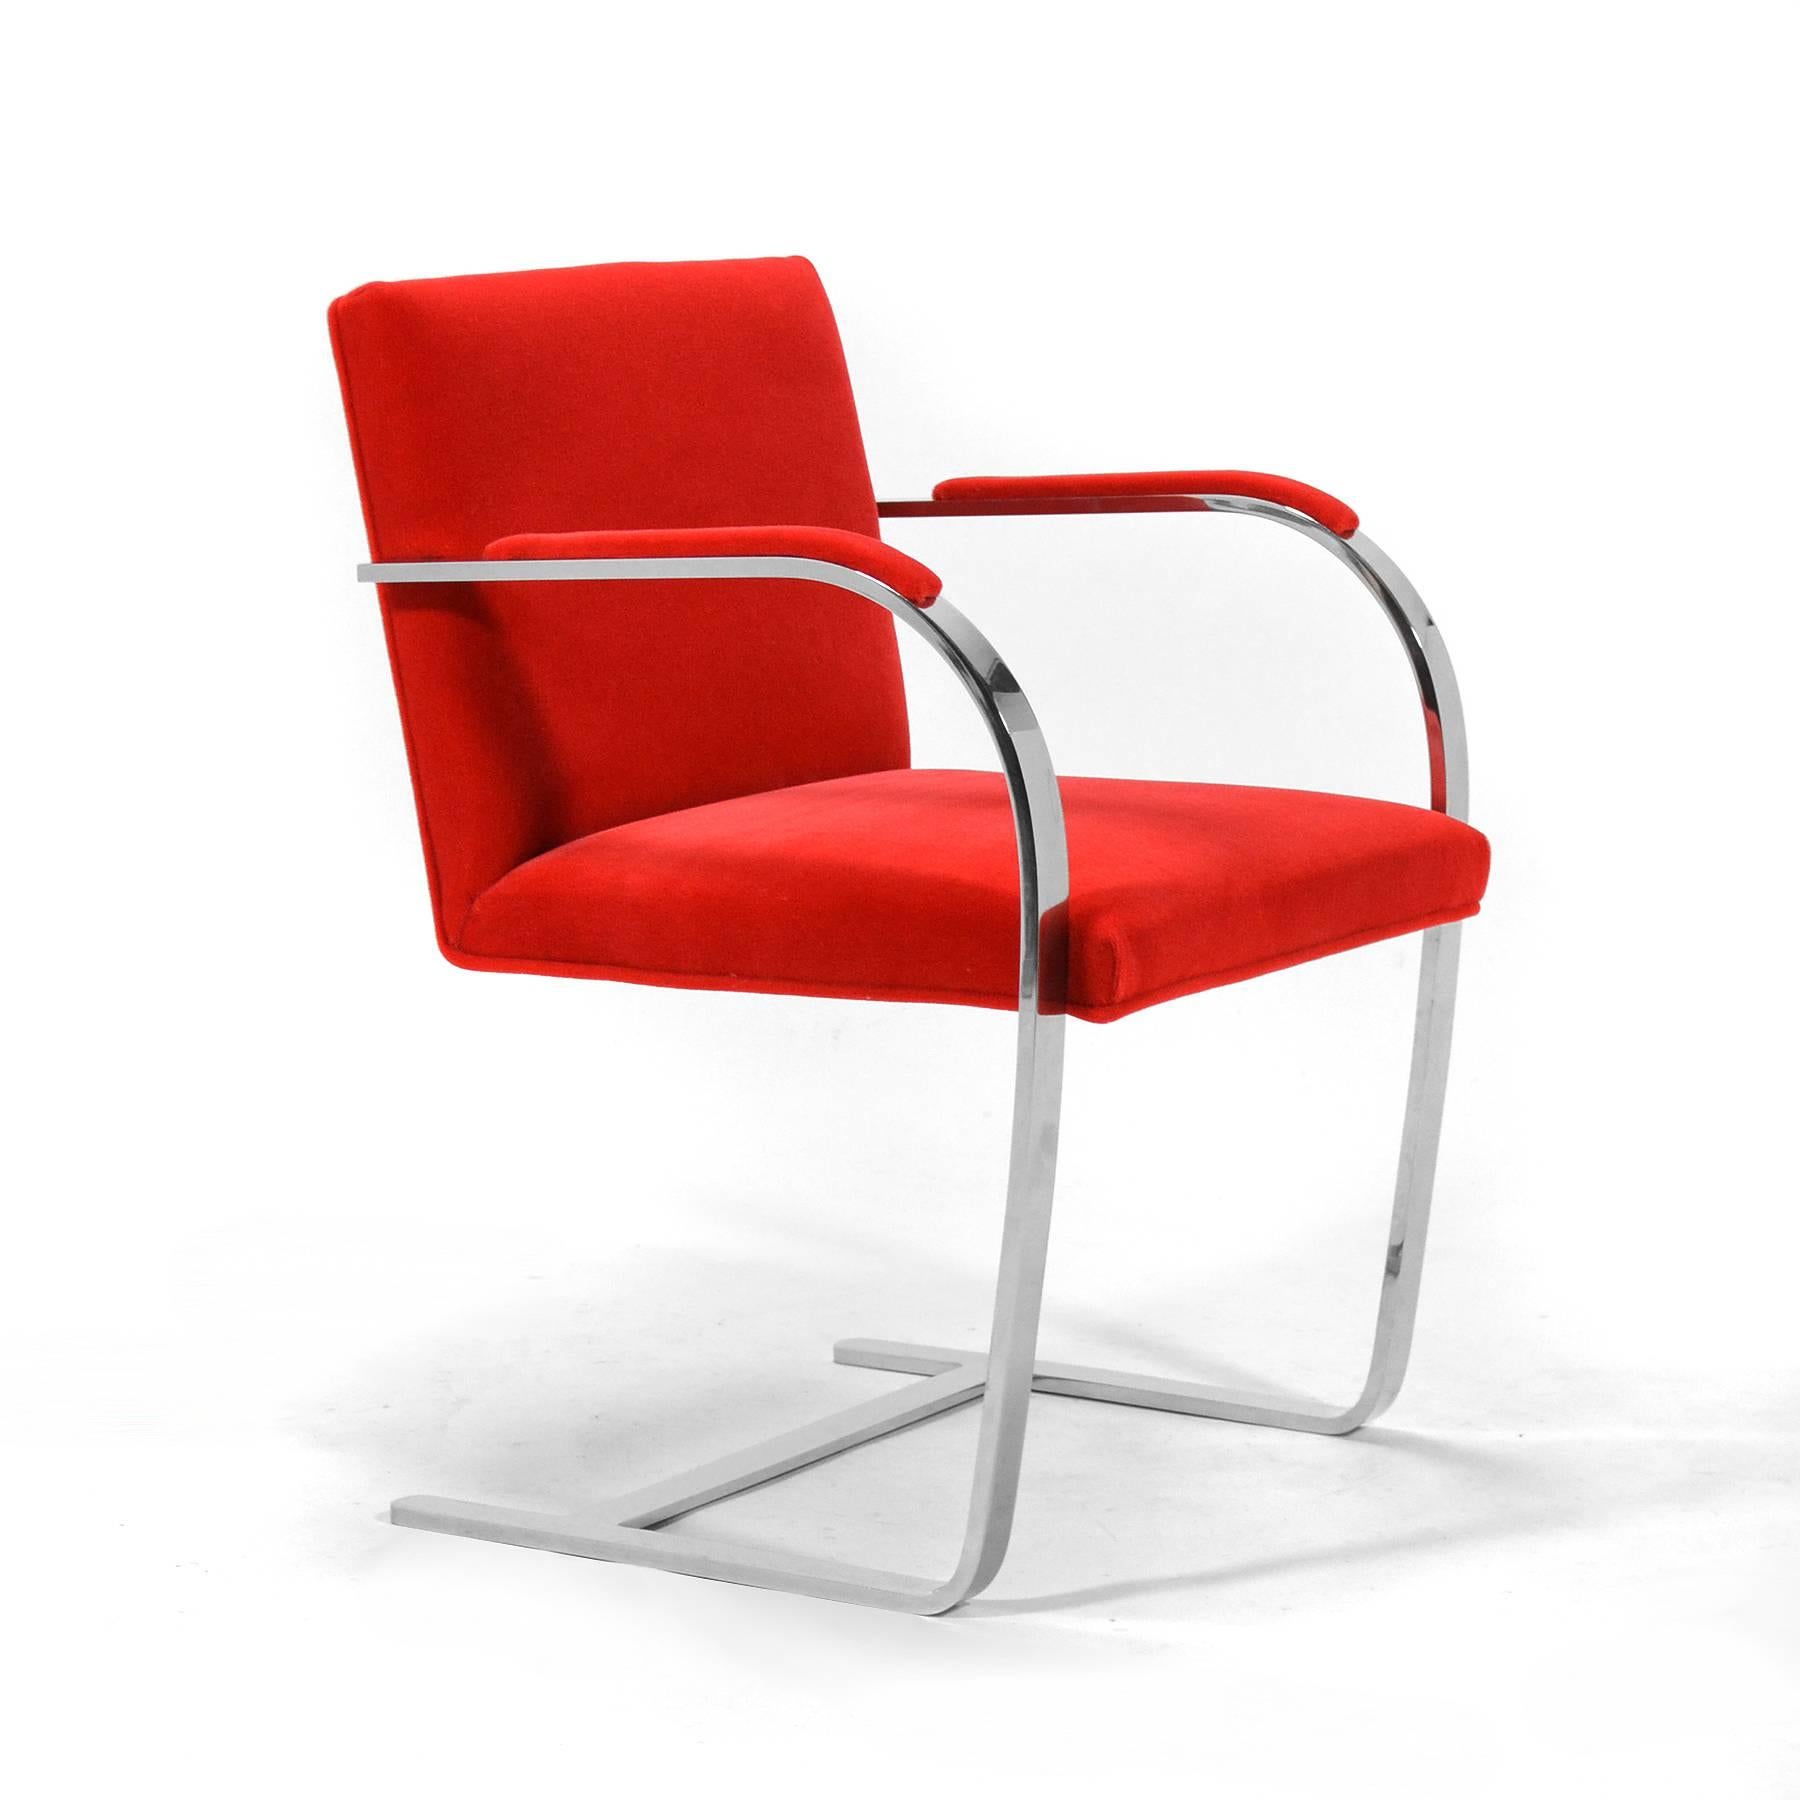 One of Mies' masterpieces, the Brno chair is a sublime Minimalist design. Designed for the Tugendhat House in 1930, Knoll has been producing the Brno chair in the US for decades. This is the top-shelf version with a frame that follows the original